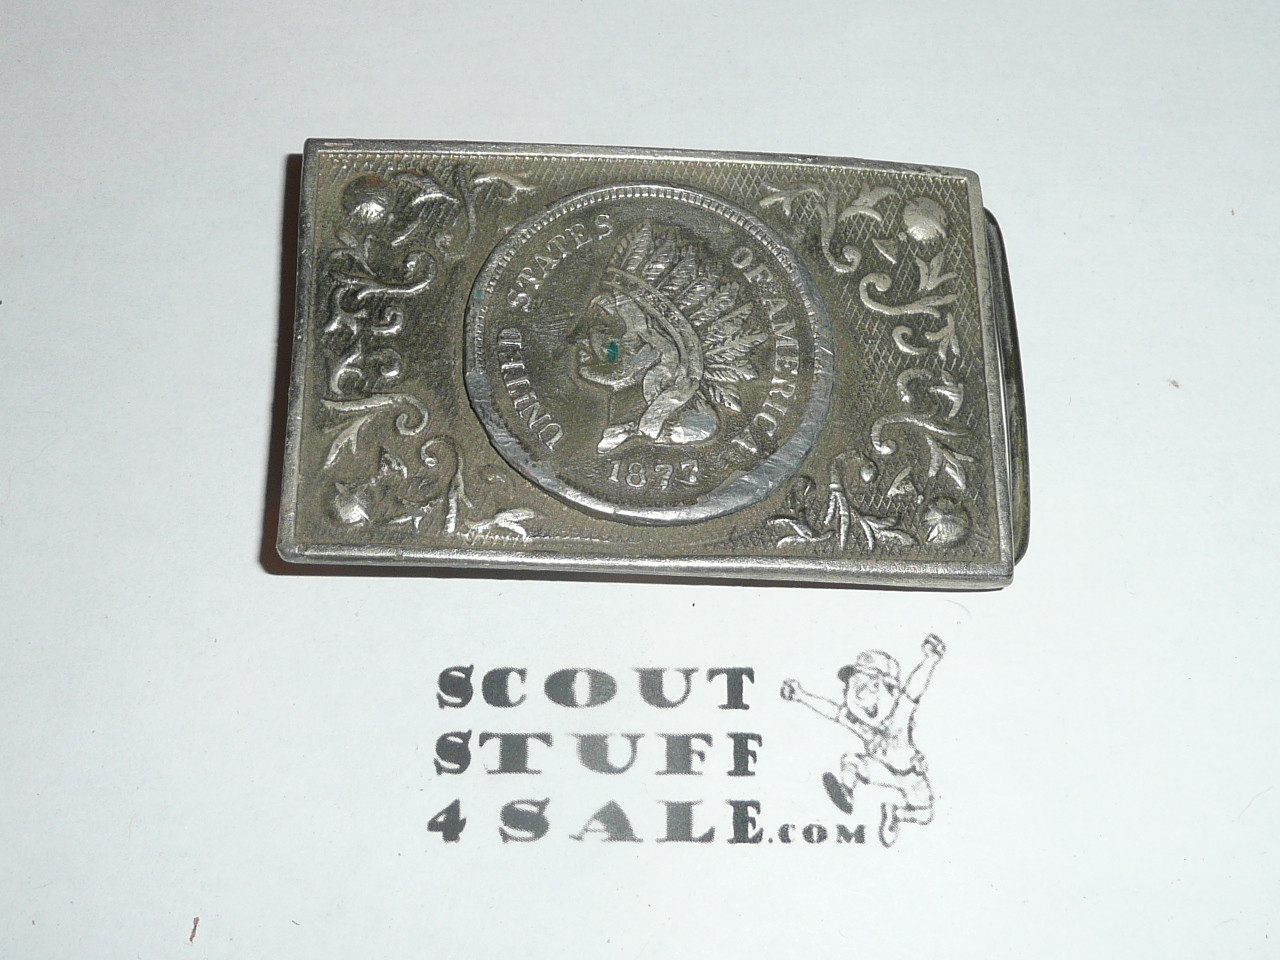 Cast 1877 US Coin Belt Buckle, used